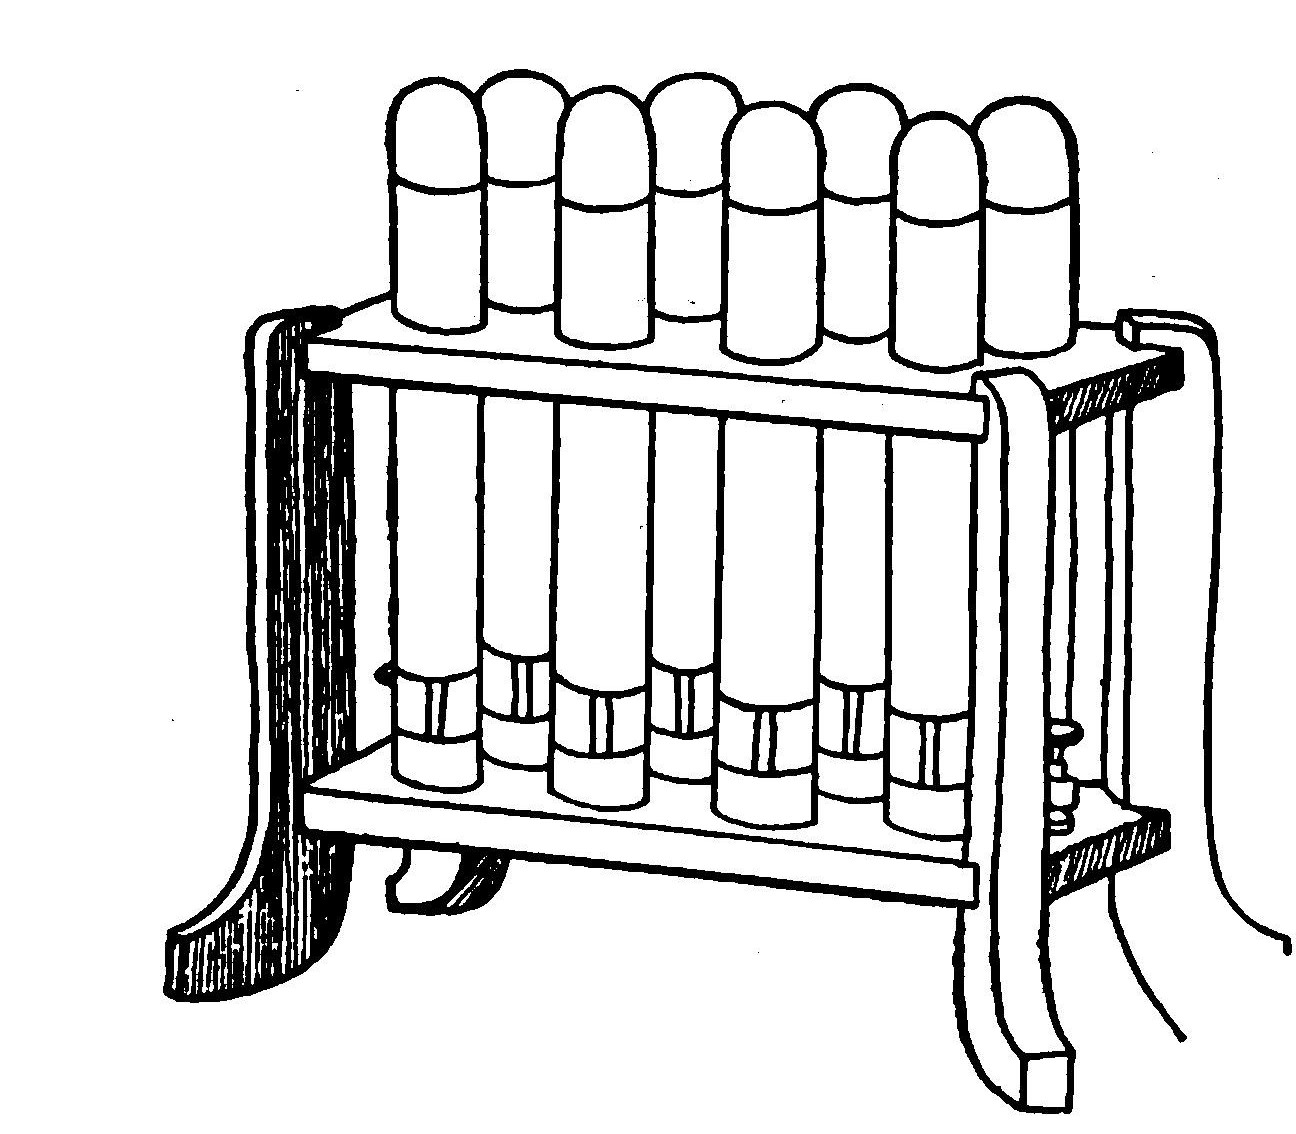 Fig. 225.—Eight Test-Tube Leyden Jars mounted in a Wooden Rack.